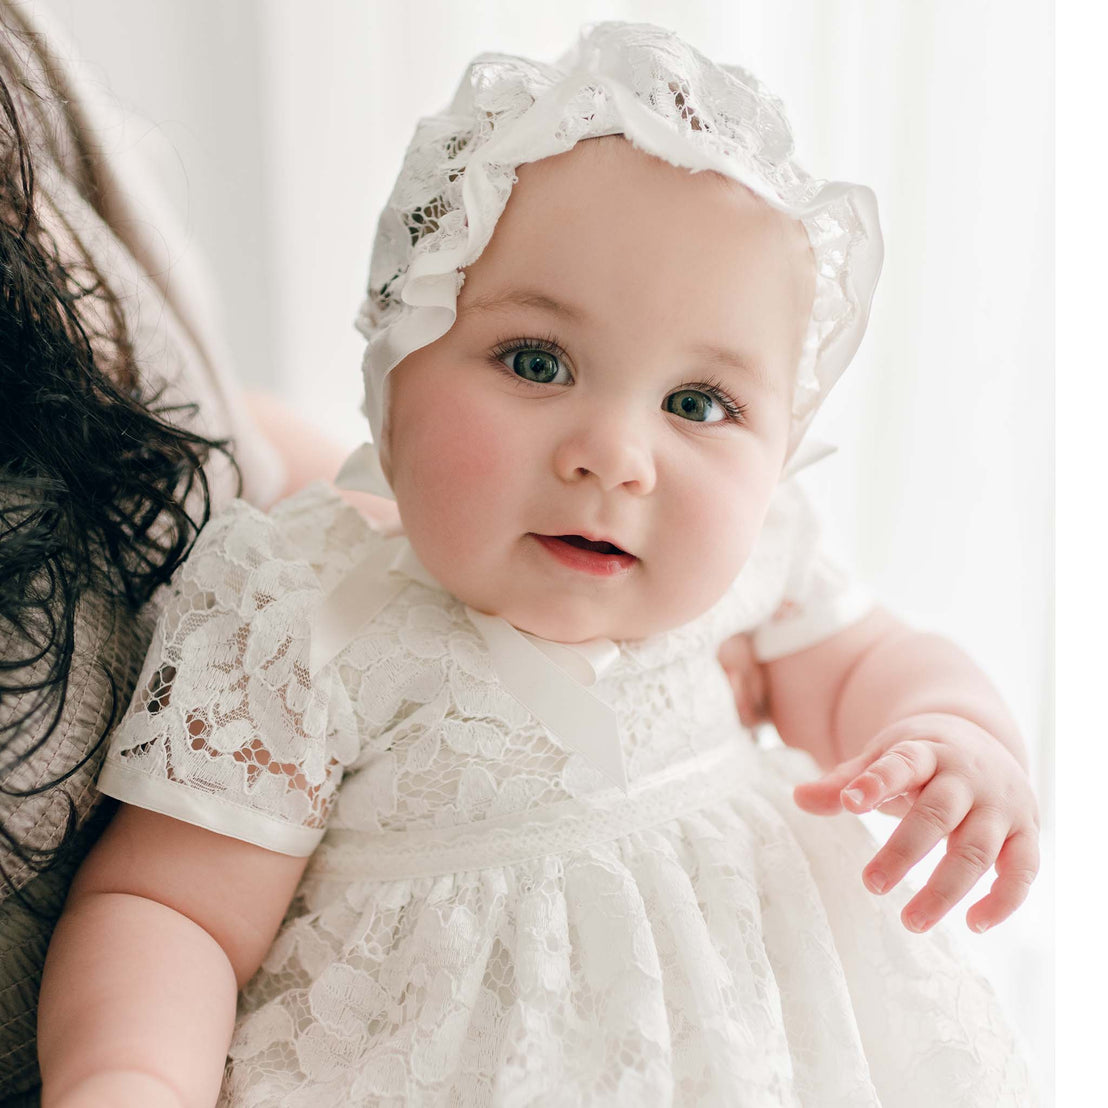 A close-up of a baby girl wearing a white lace Rose Christening Gown & Bonnet with pearl style buttons, looking directly at the camera with bright blue eyes and a subtle smile.